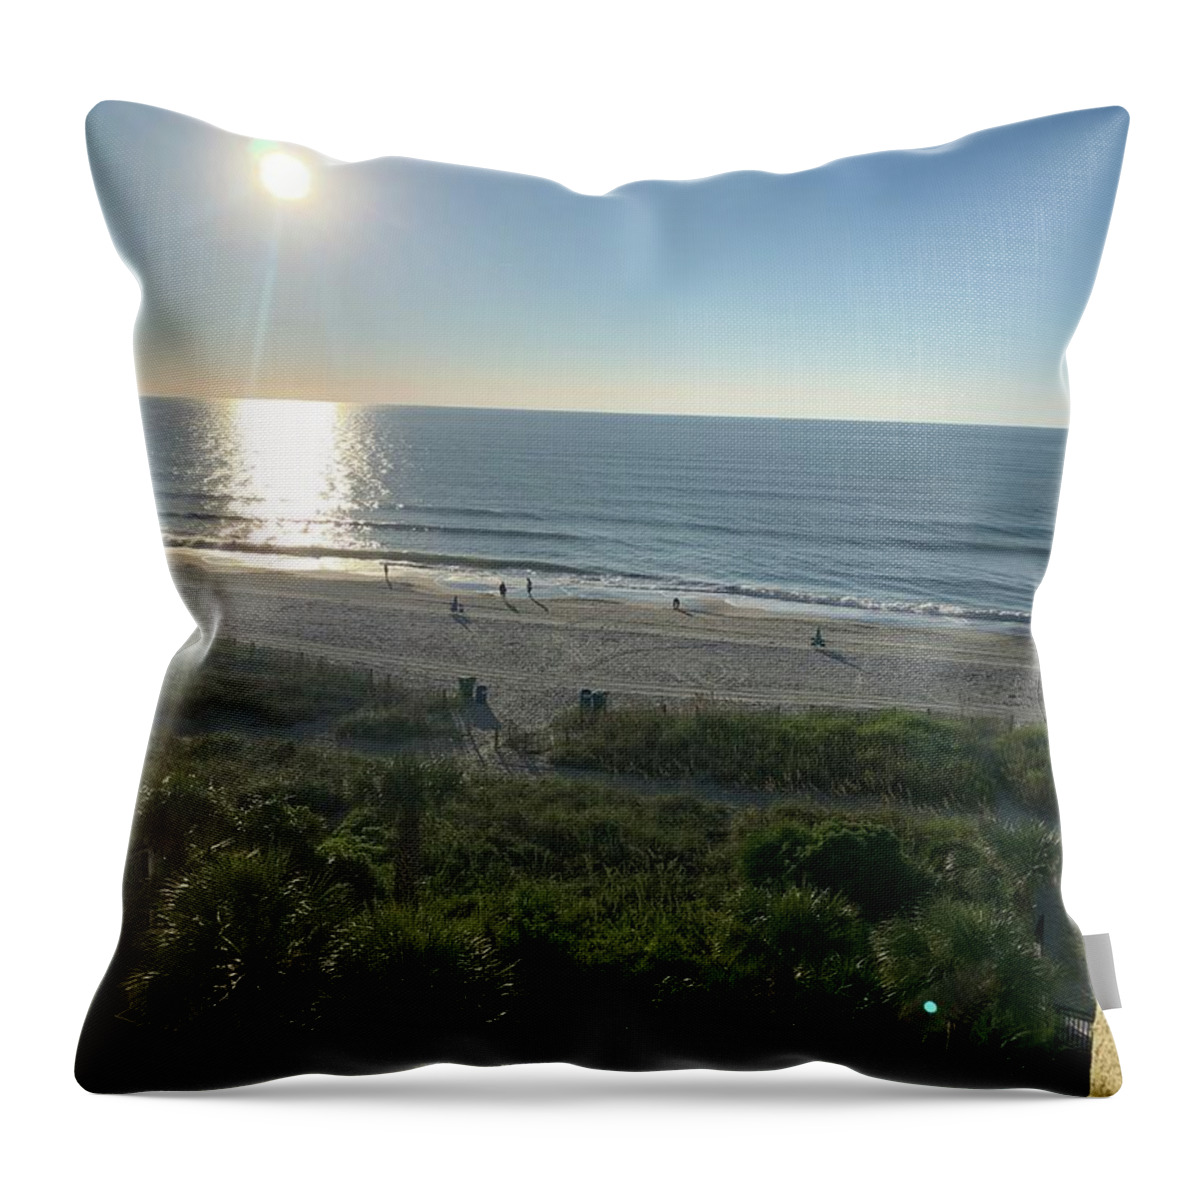 Photography Throw Pillow featuring the photograph Good Morning Myrtle Beach by Lisa White